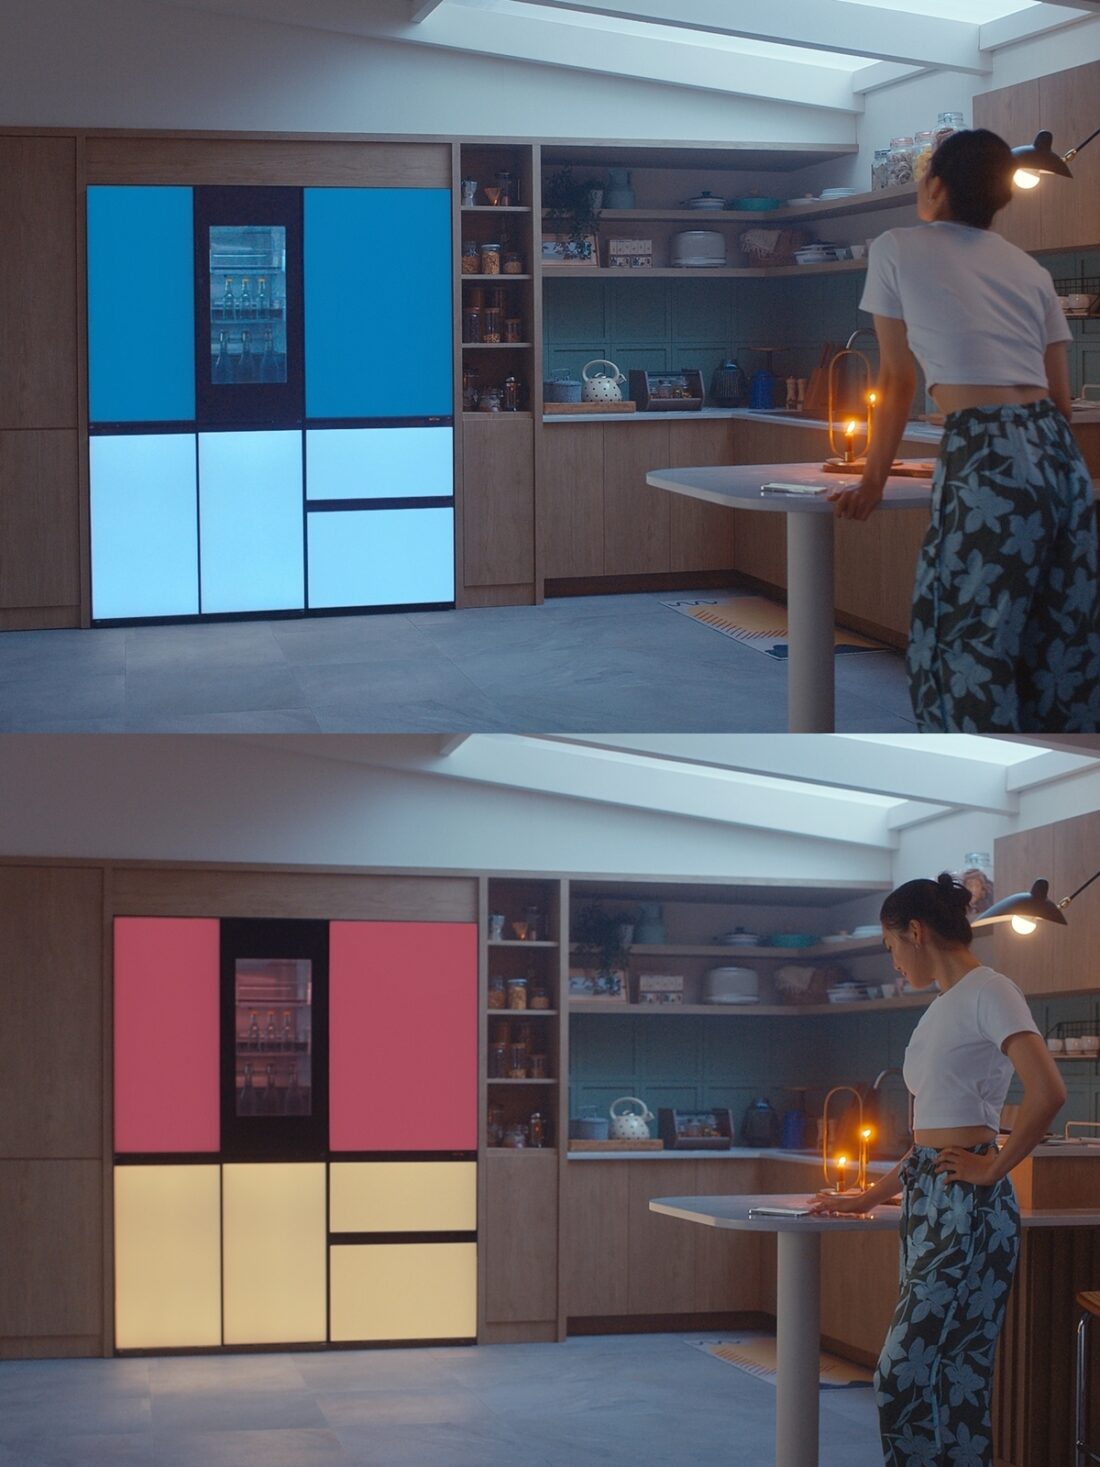 A woman conveniently changes the color of the LG MoodUPTM refrigerator panel door with the smartphone